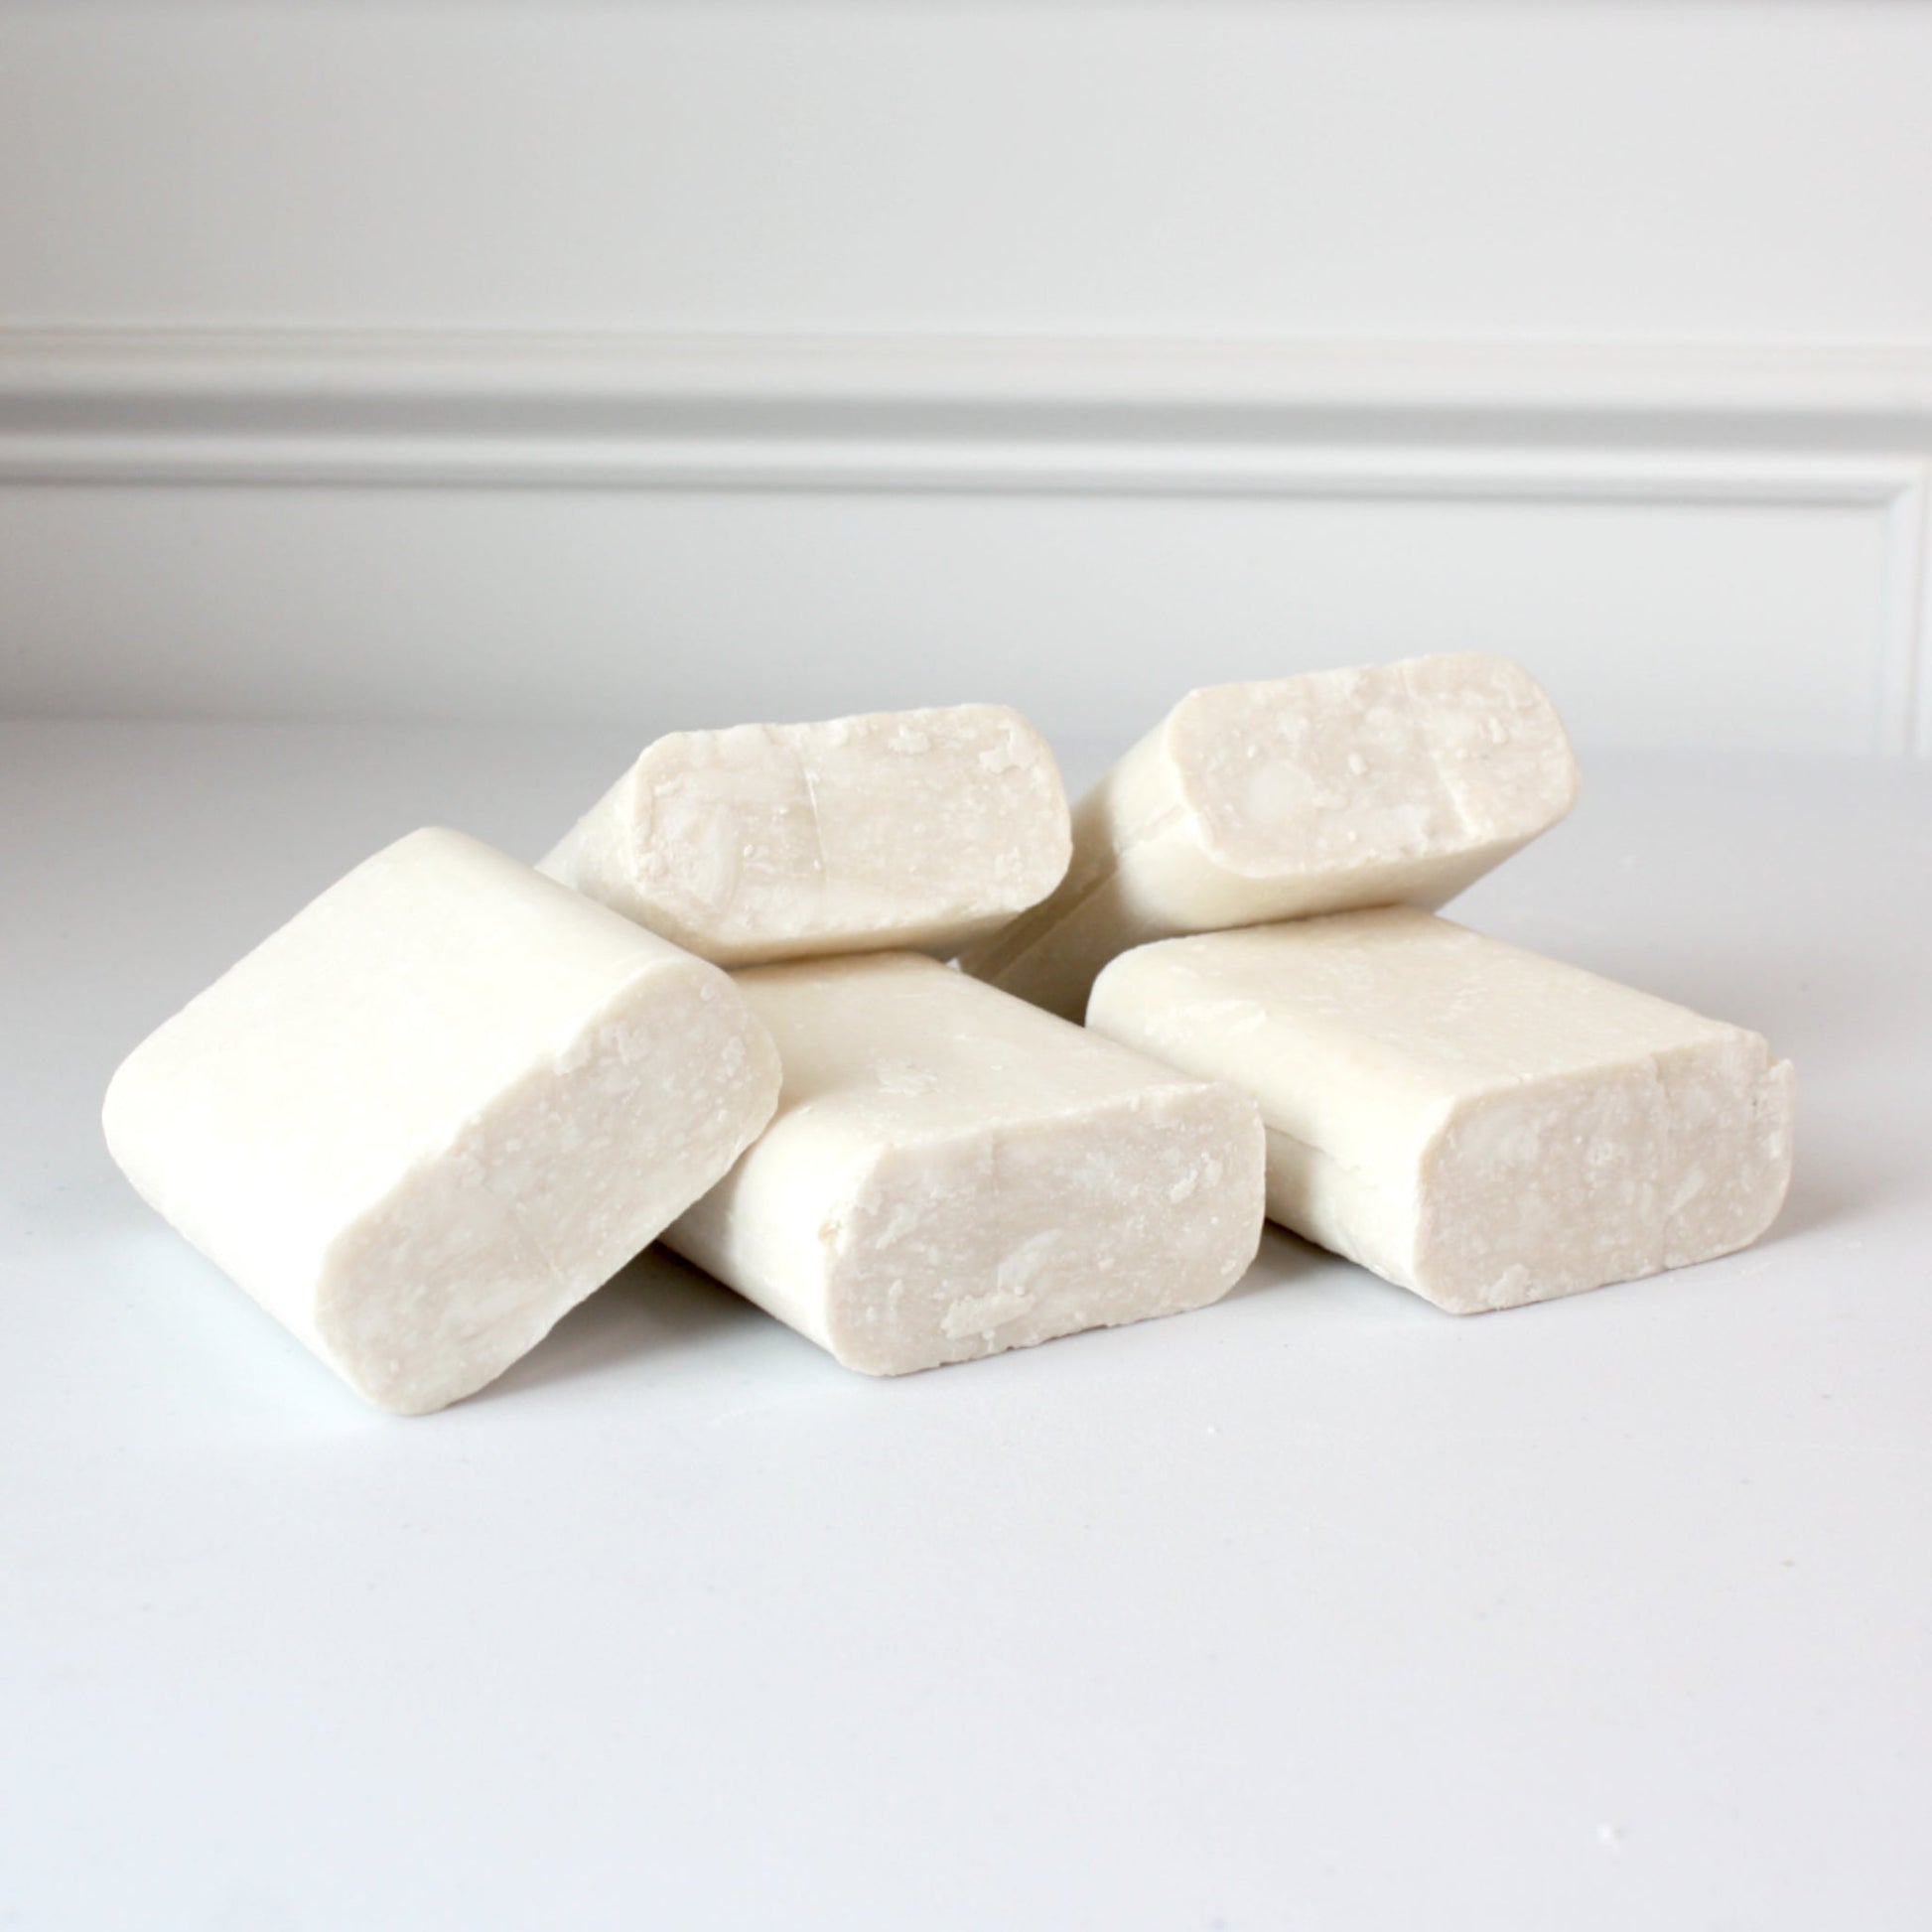 Amish Farms Soap - We are excited to launch our NEW Amish Farm Pet Soap to  our website! We all have sensitive skin so does our pets! Amish Farm Soap  has combined